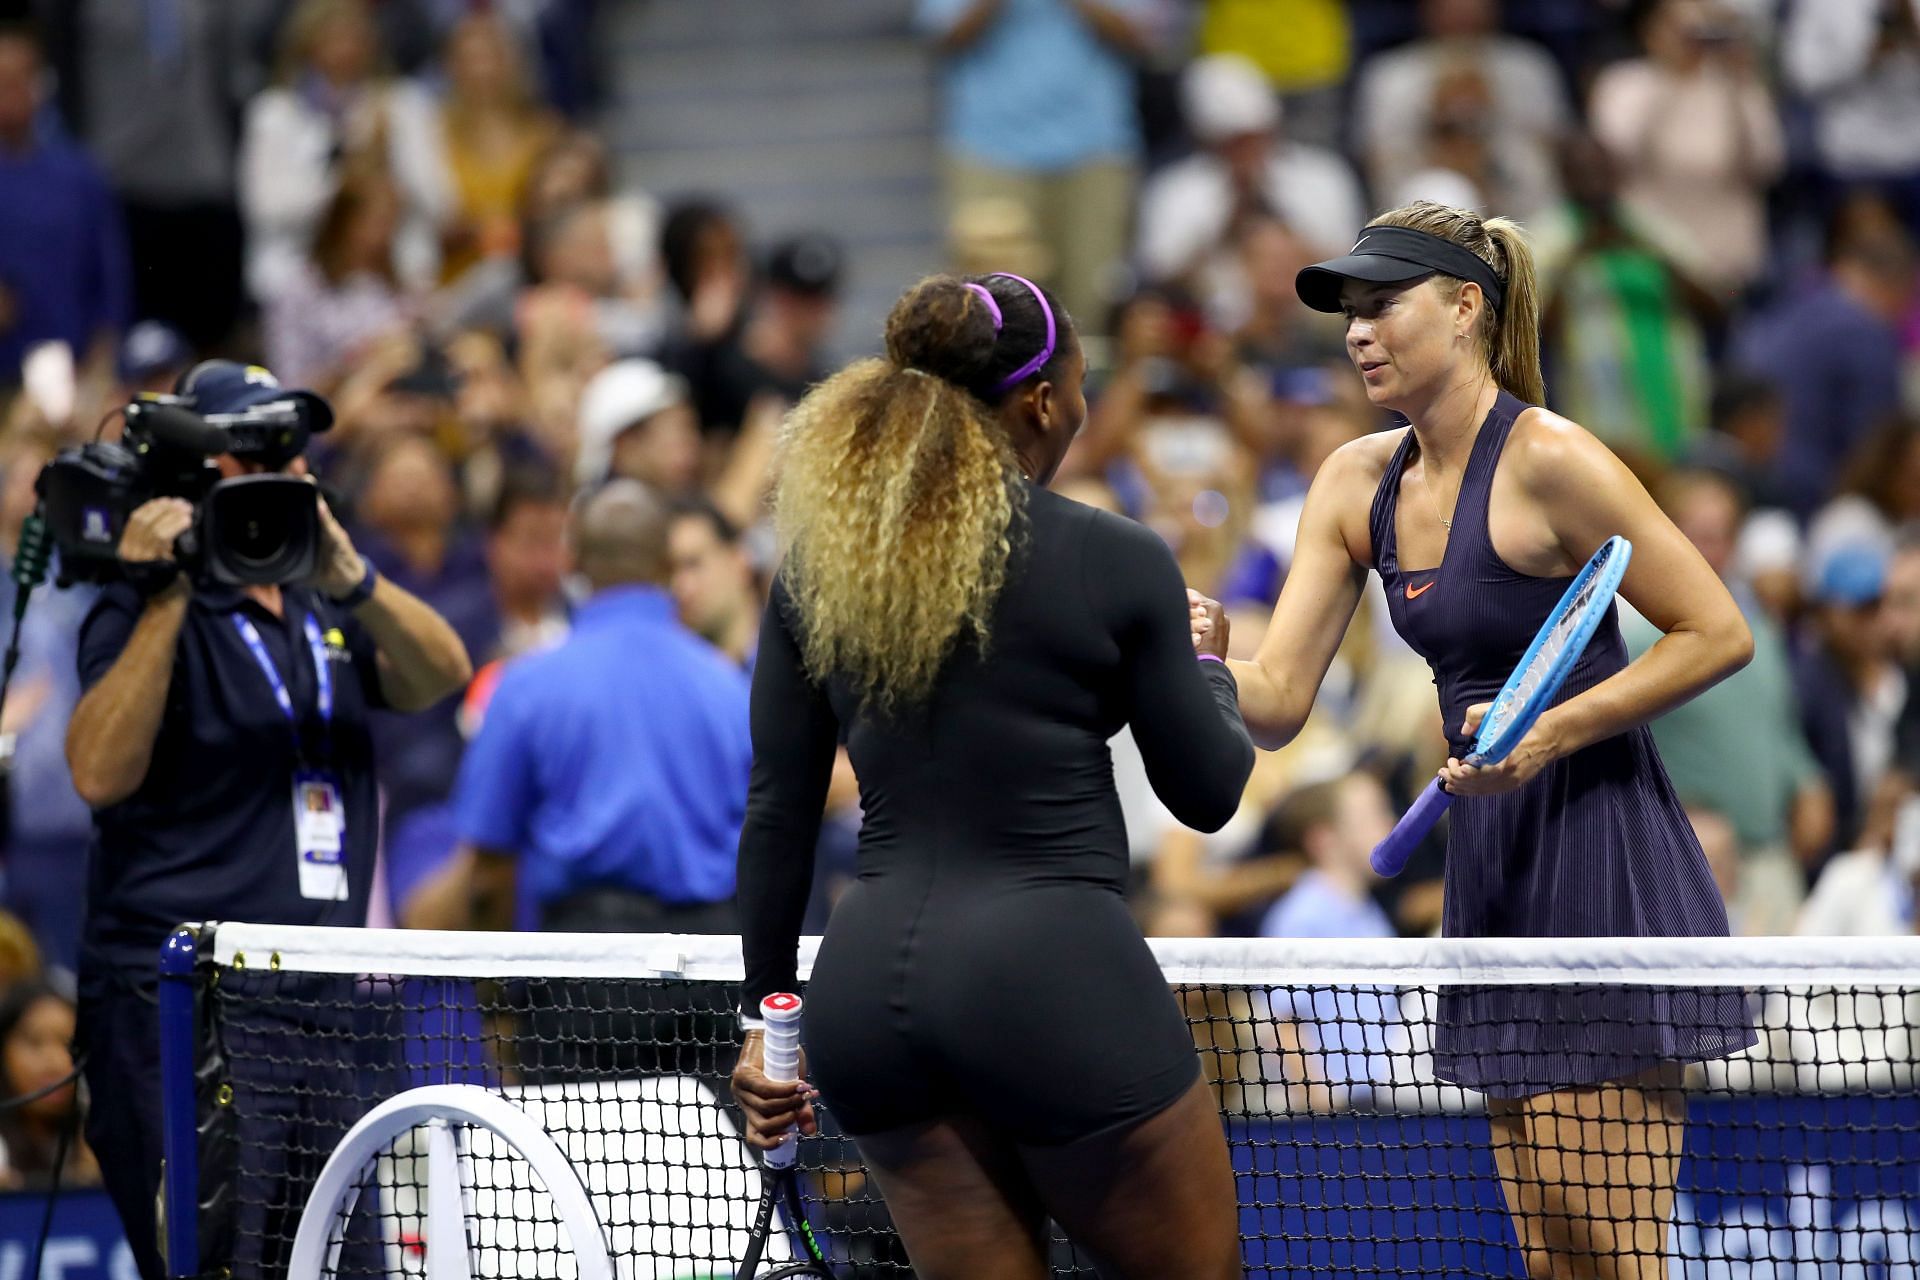 Serena Williams beat Maria Sharapova in their final career meeting at the 2019 US Open